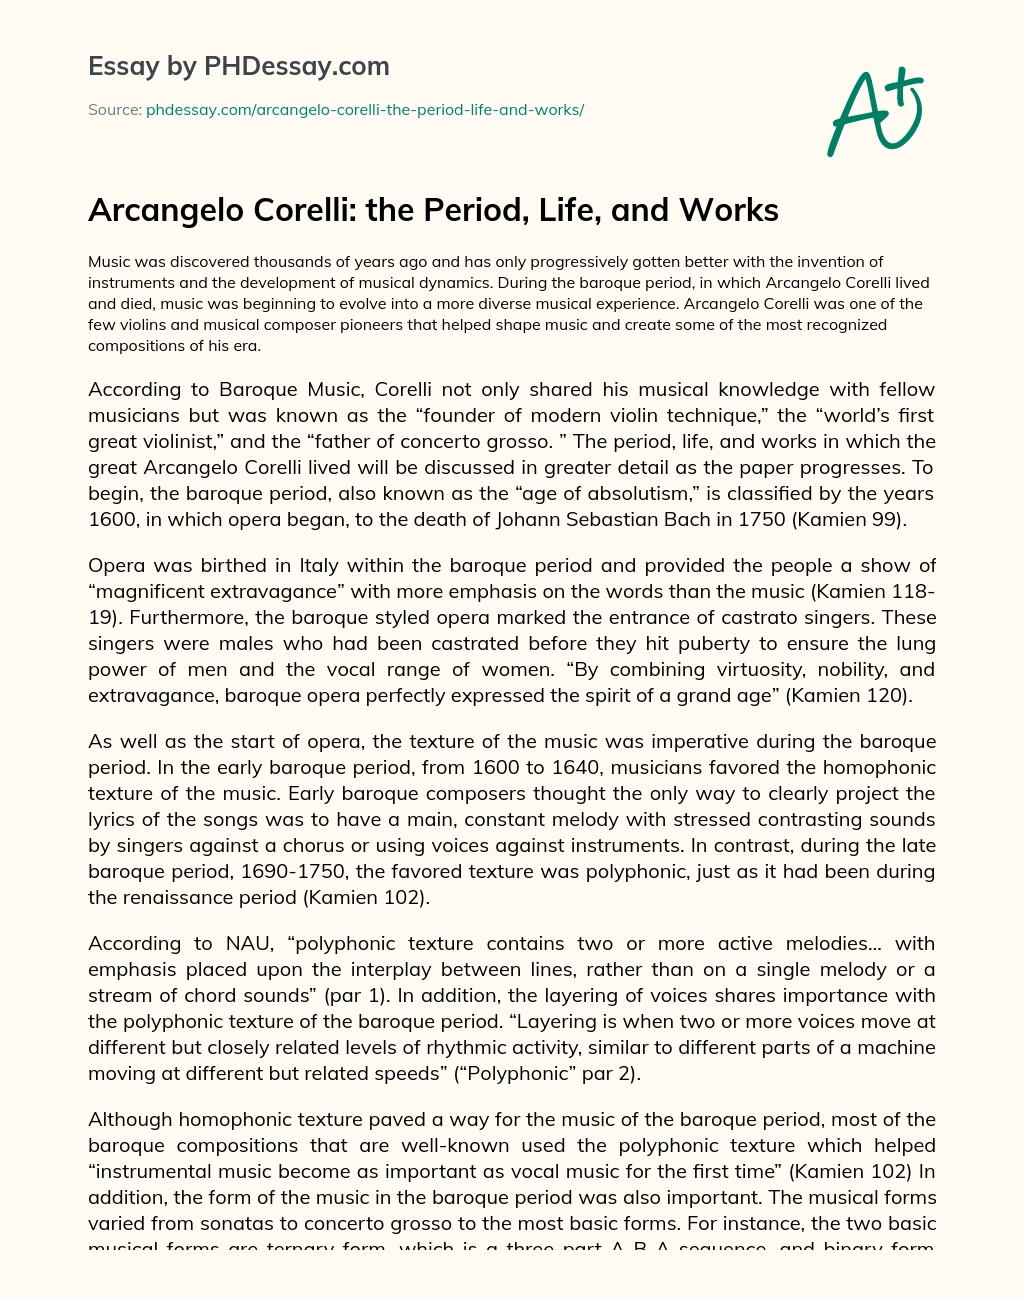 Arcangelo Corelli: the Period, Life, and Works essay